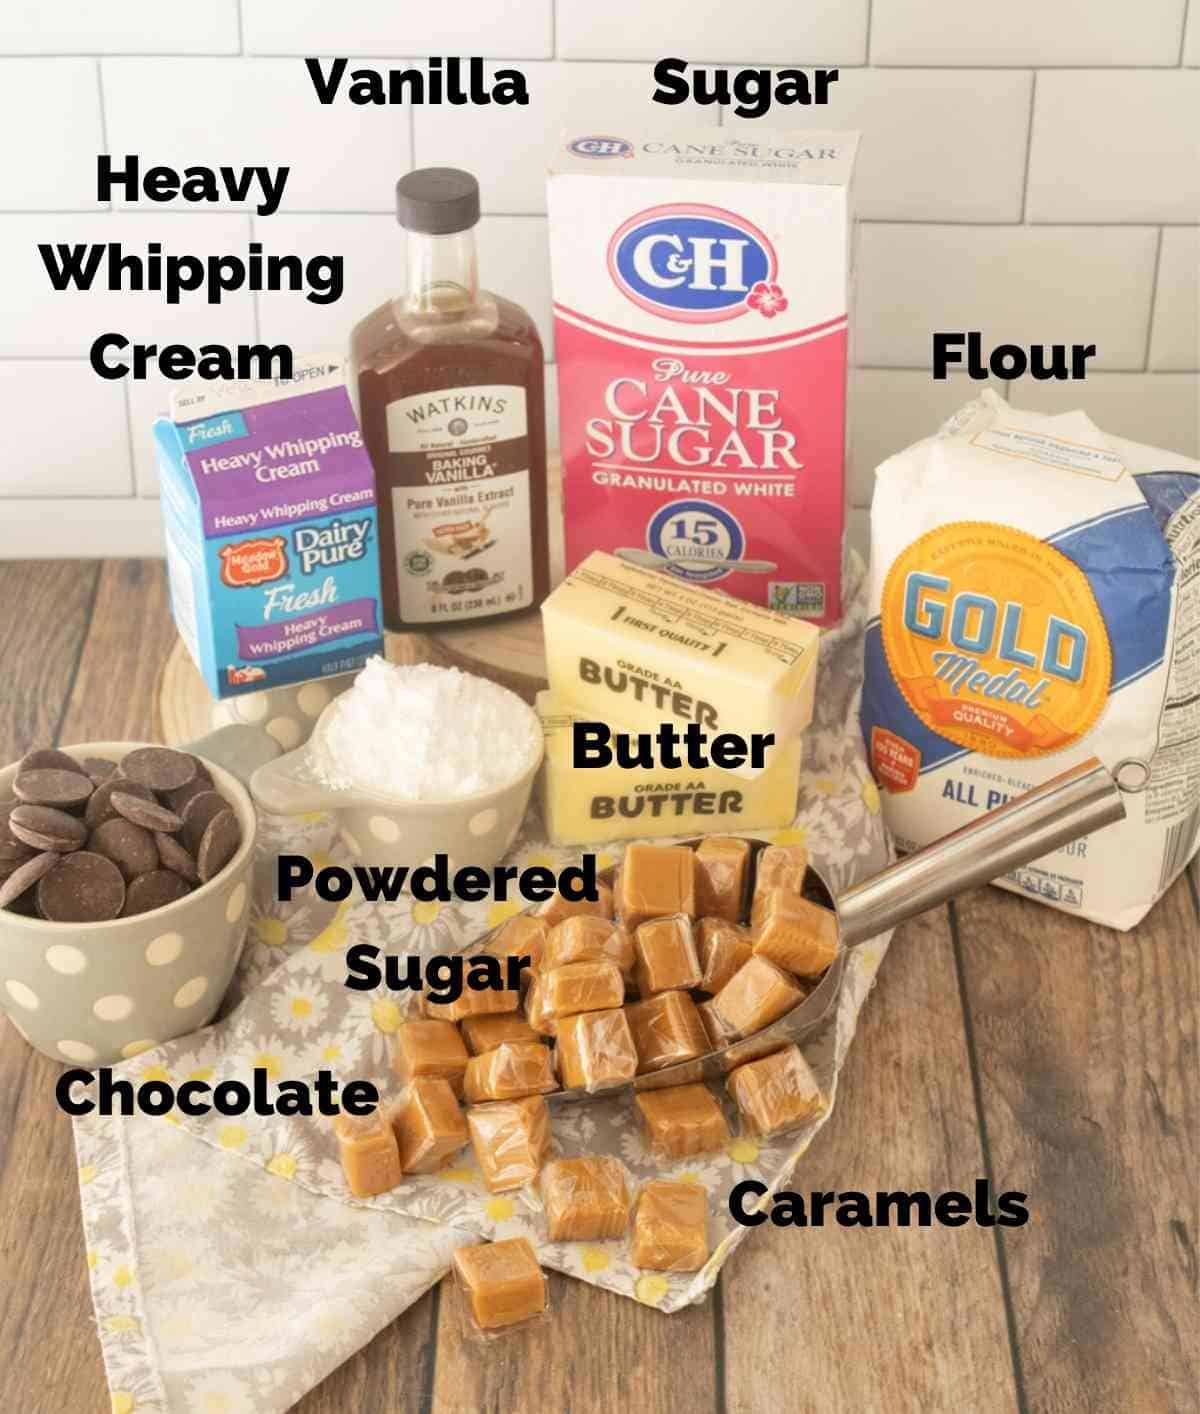 Twix ingredients needed for this recipe.